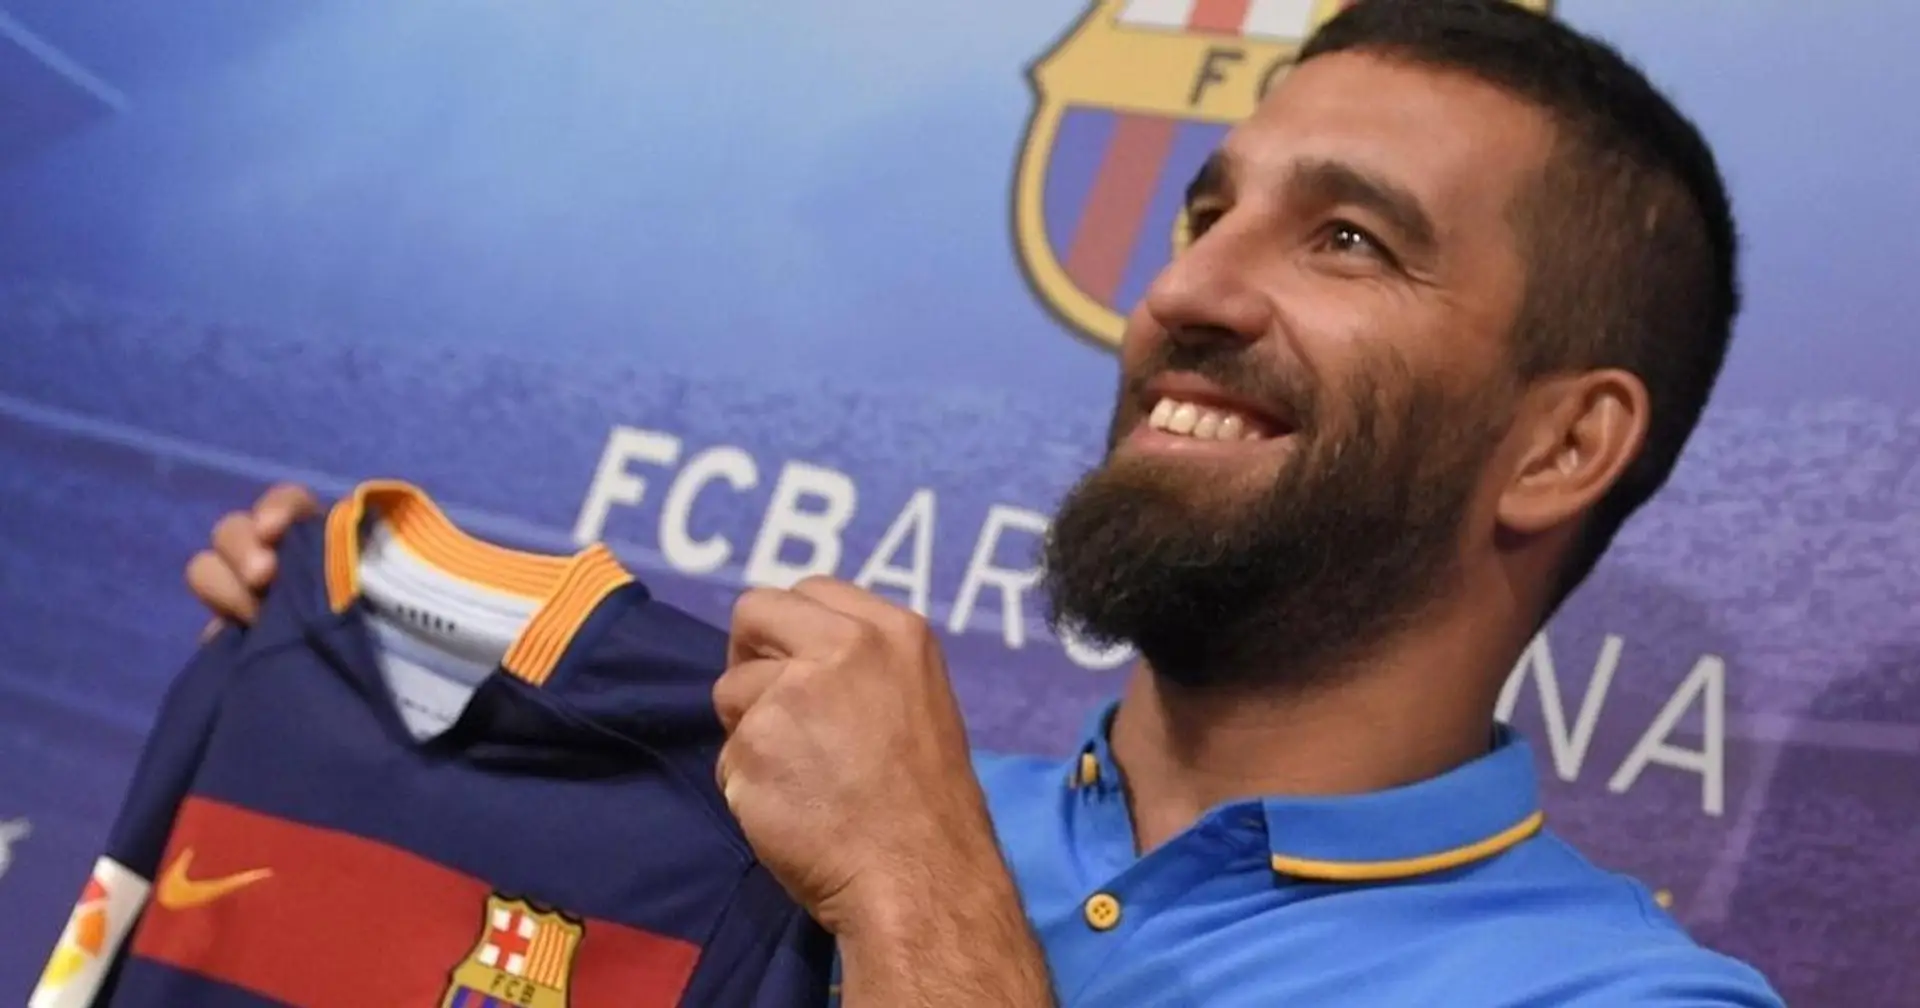 Arda Turan finally leaves Barcelona after five turbulent years